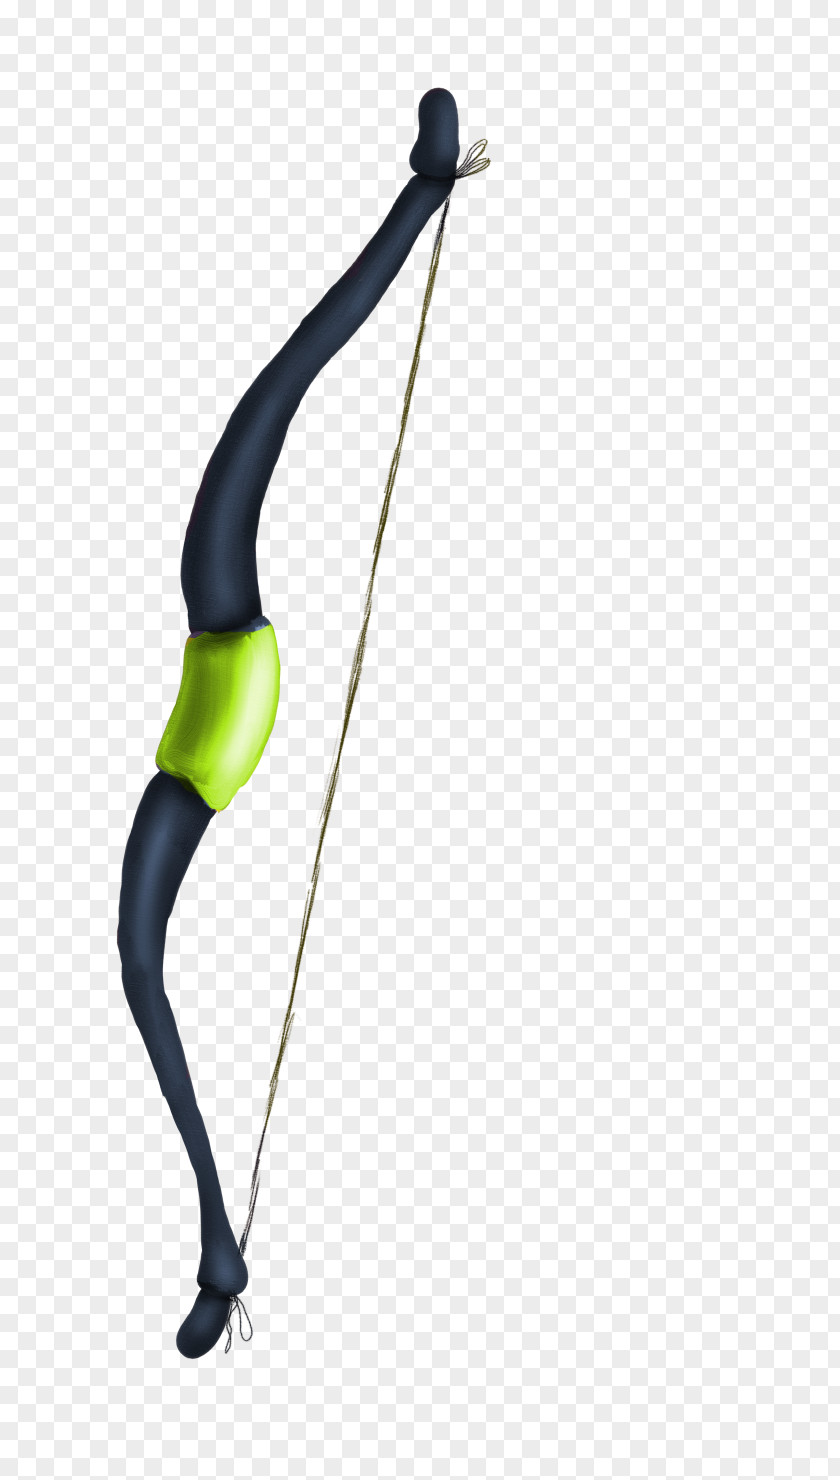 Pretty Creative Bow And Arrow Creativity PNG